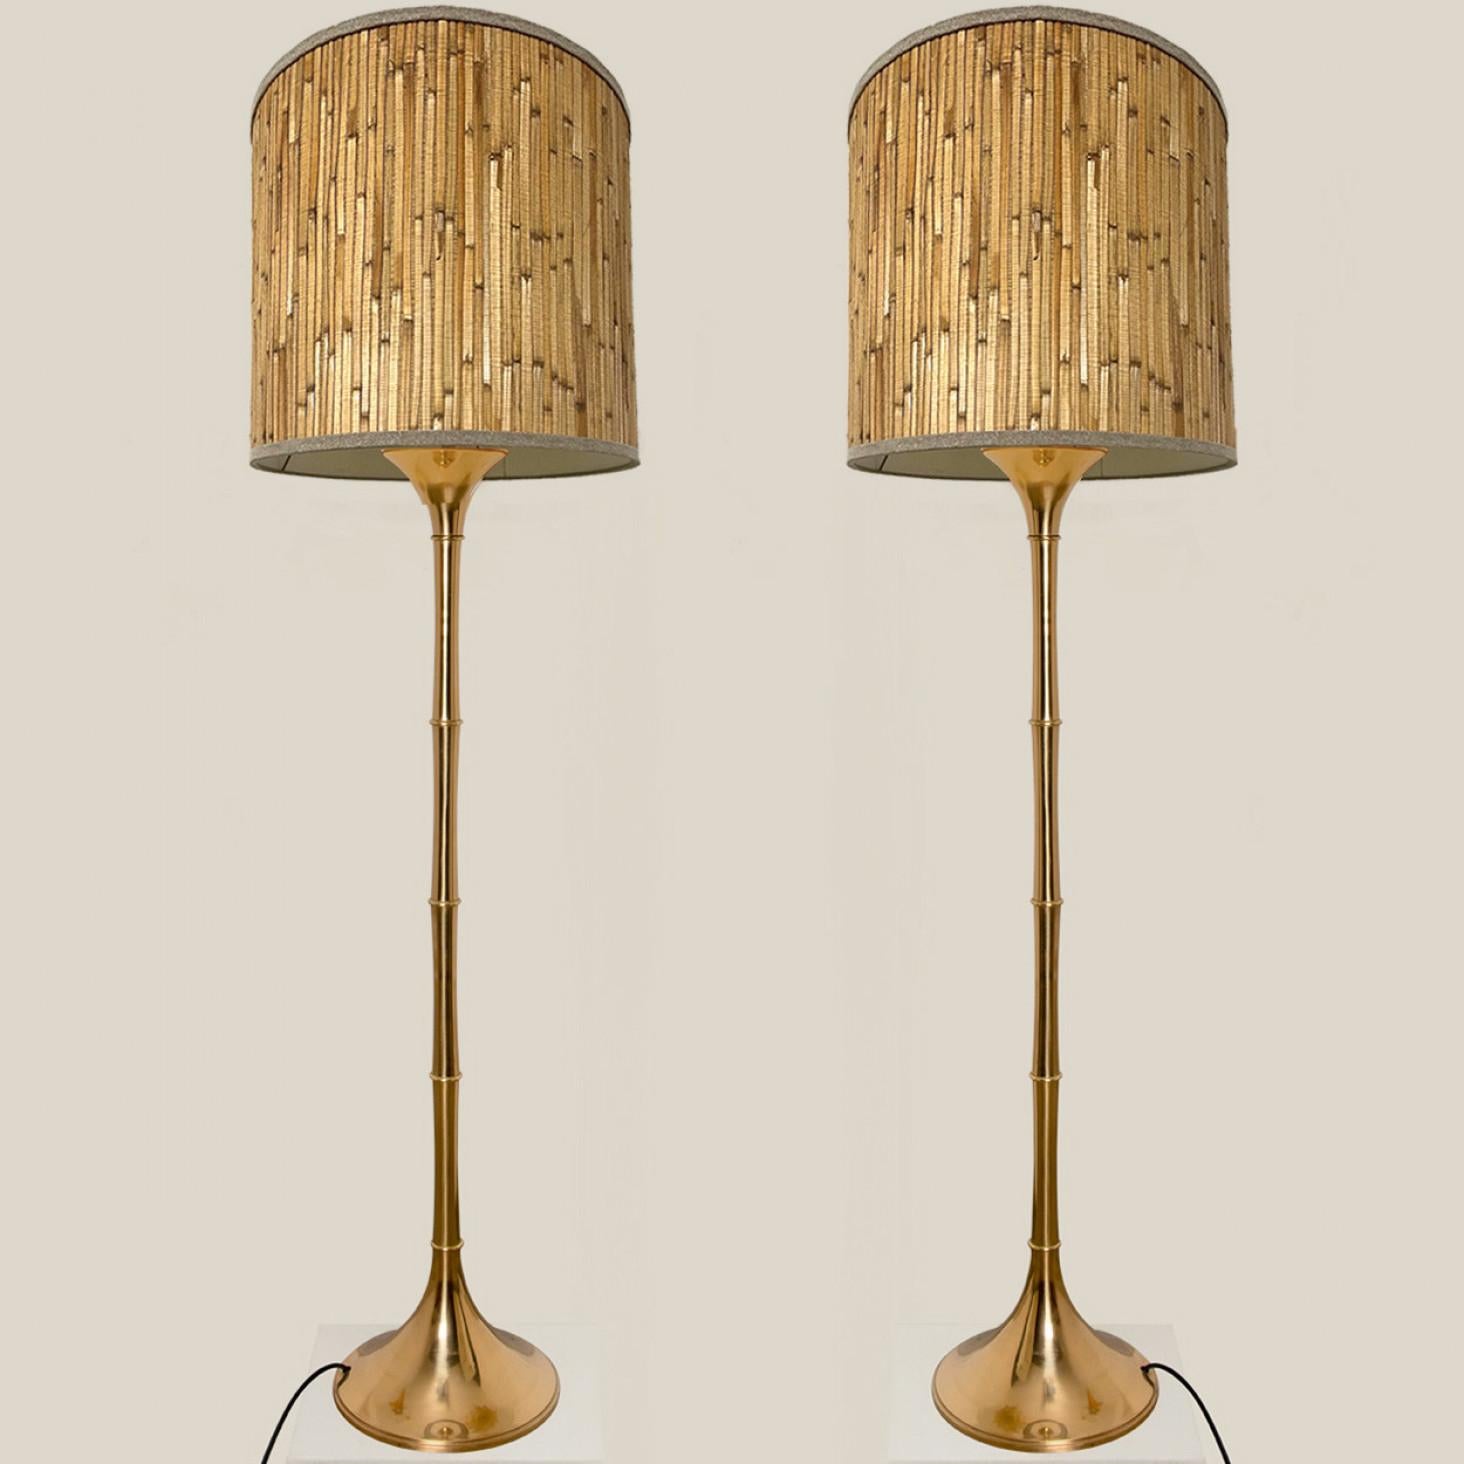 Pair of Table Lamps Gold Brass and Bamboo Shade by Ingo Maurer, Germany, 1968 For Sale 4